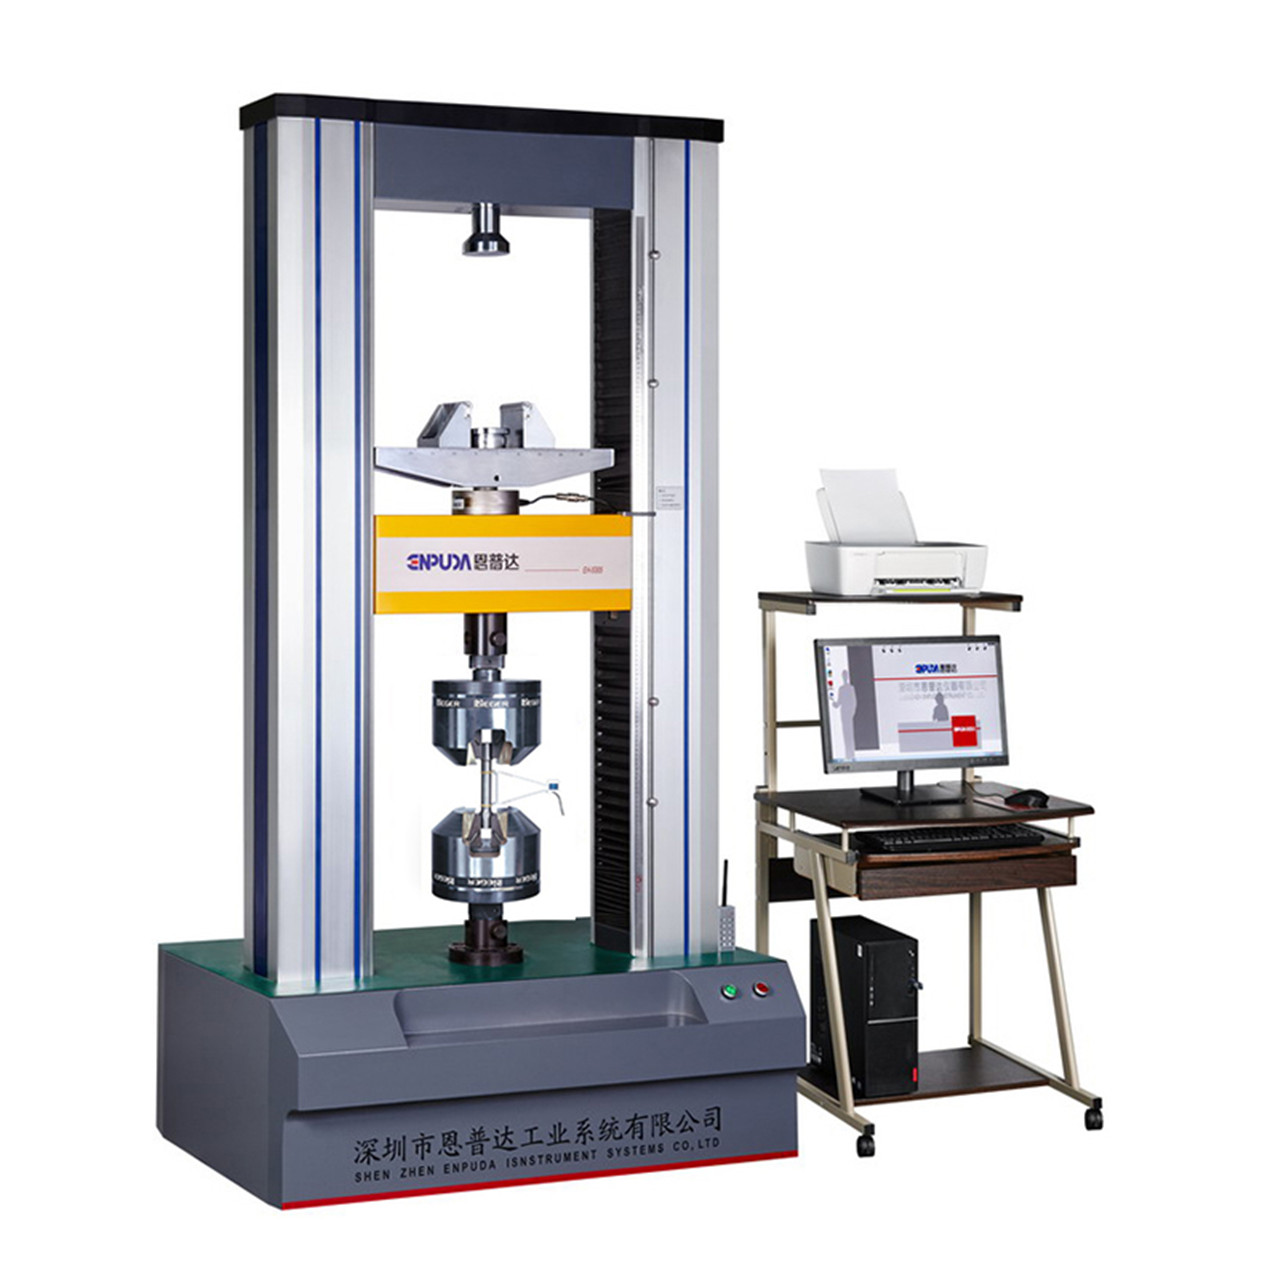 https://www.epd-instrument.com/high-and-mow-temperature-electronic-universal-testing-machine-product/